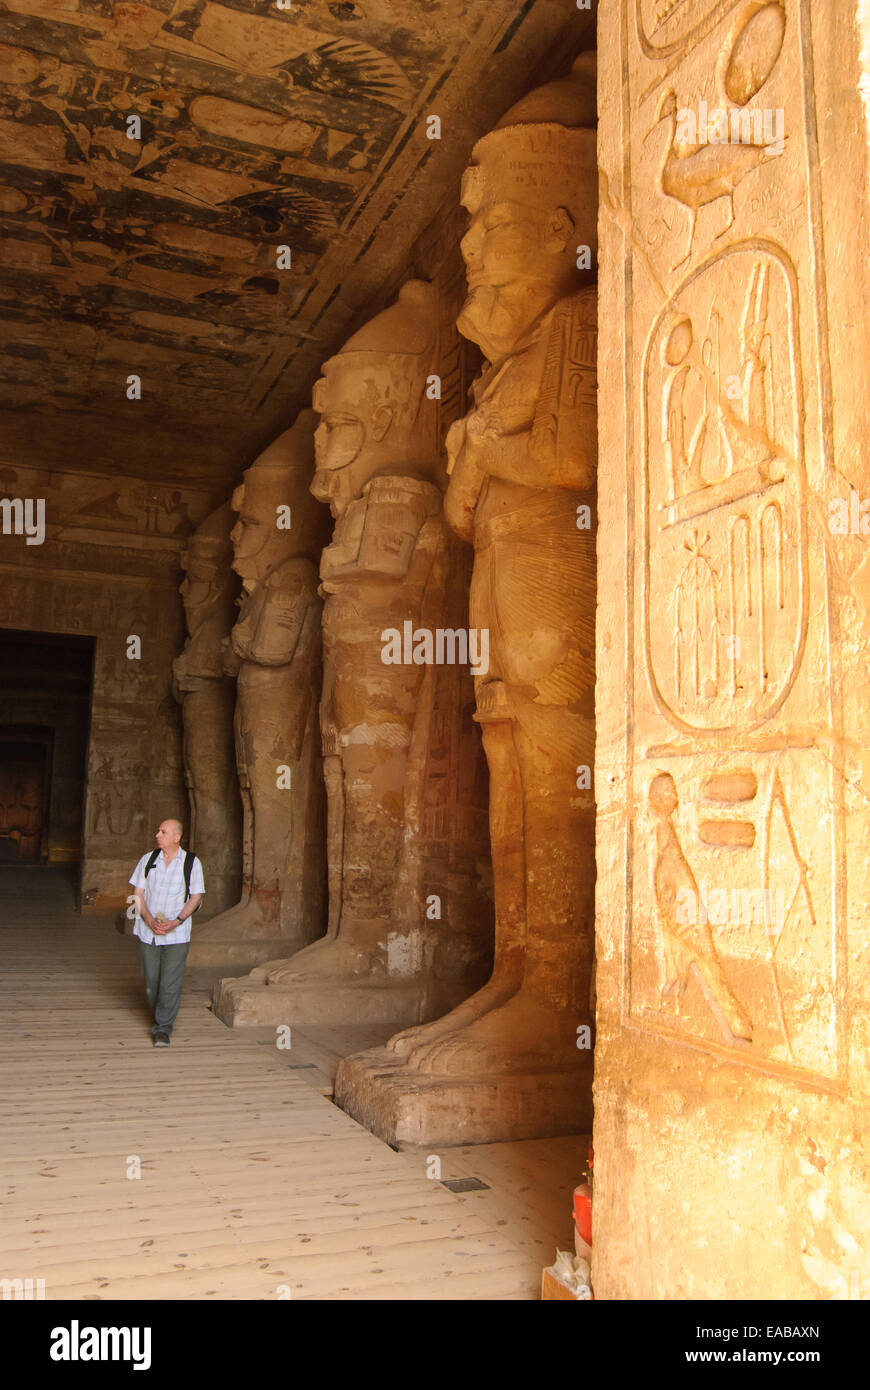 Inside the great temple of Abu Simbel. Stock Photo